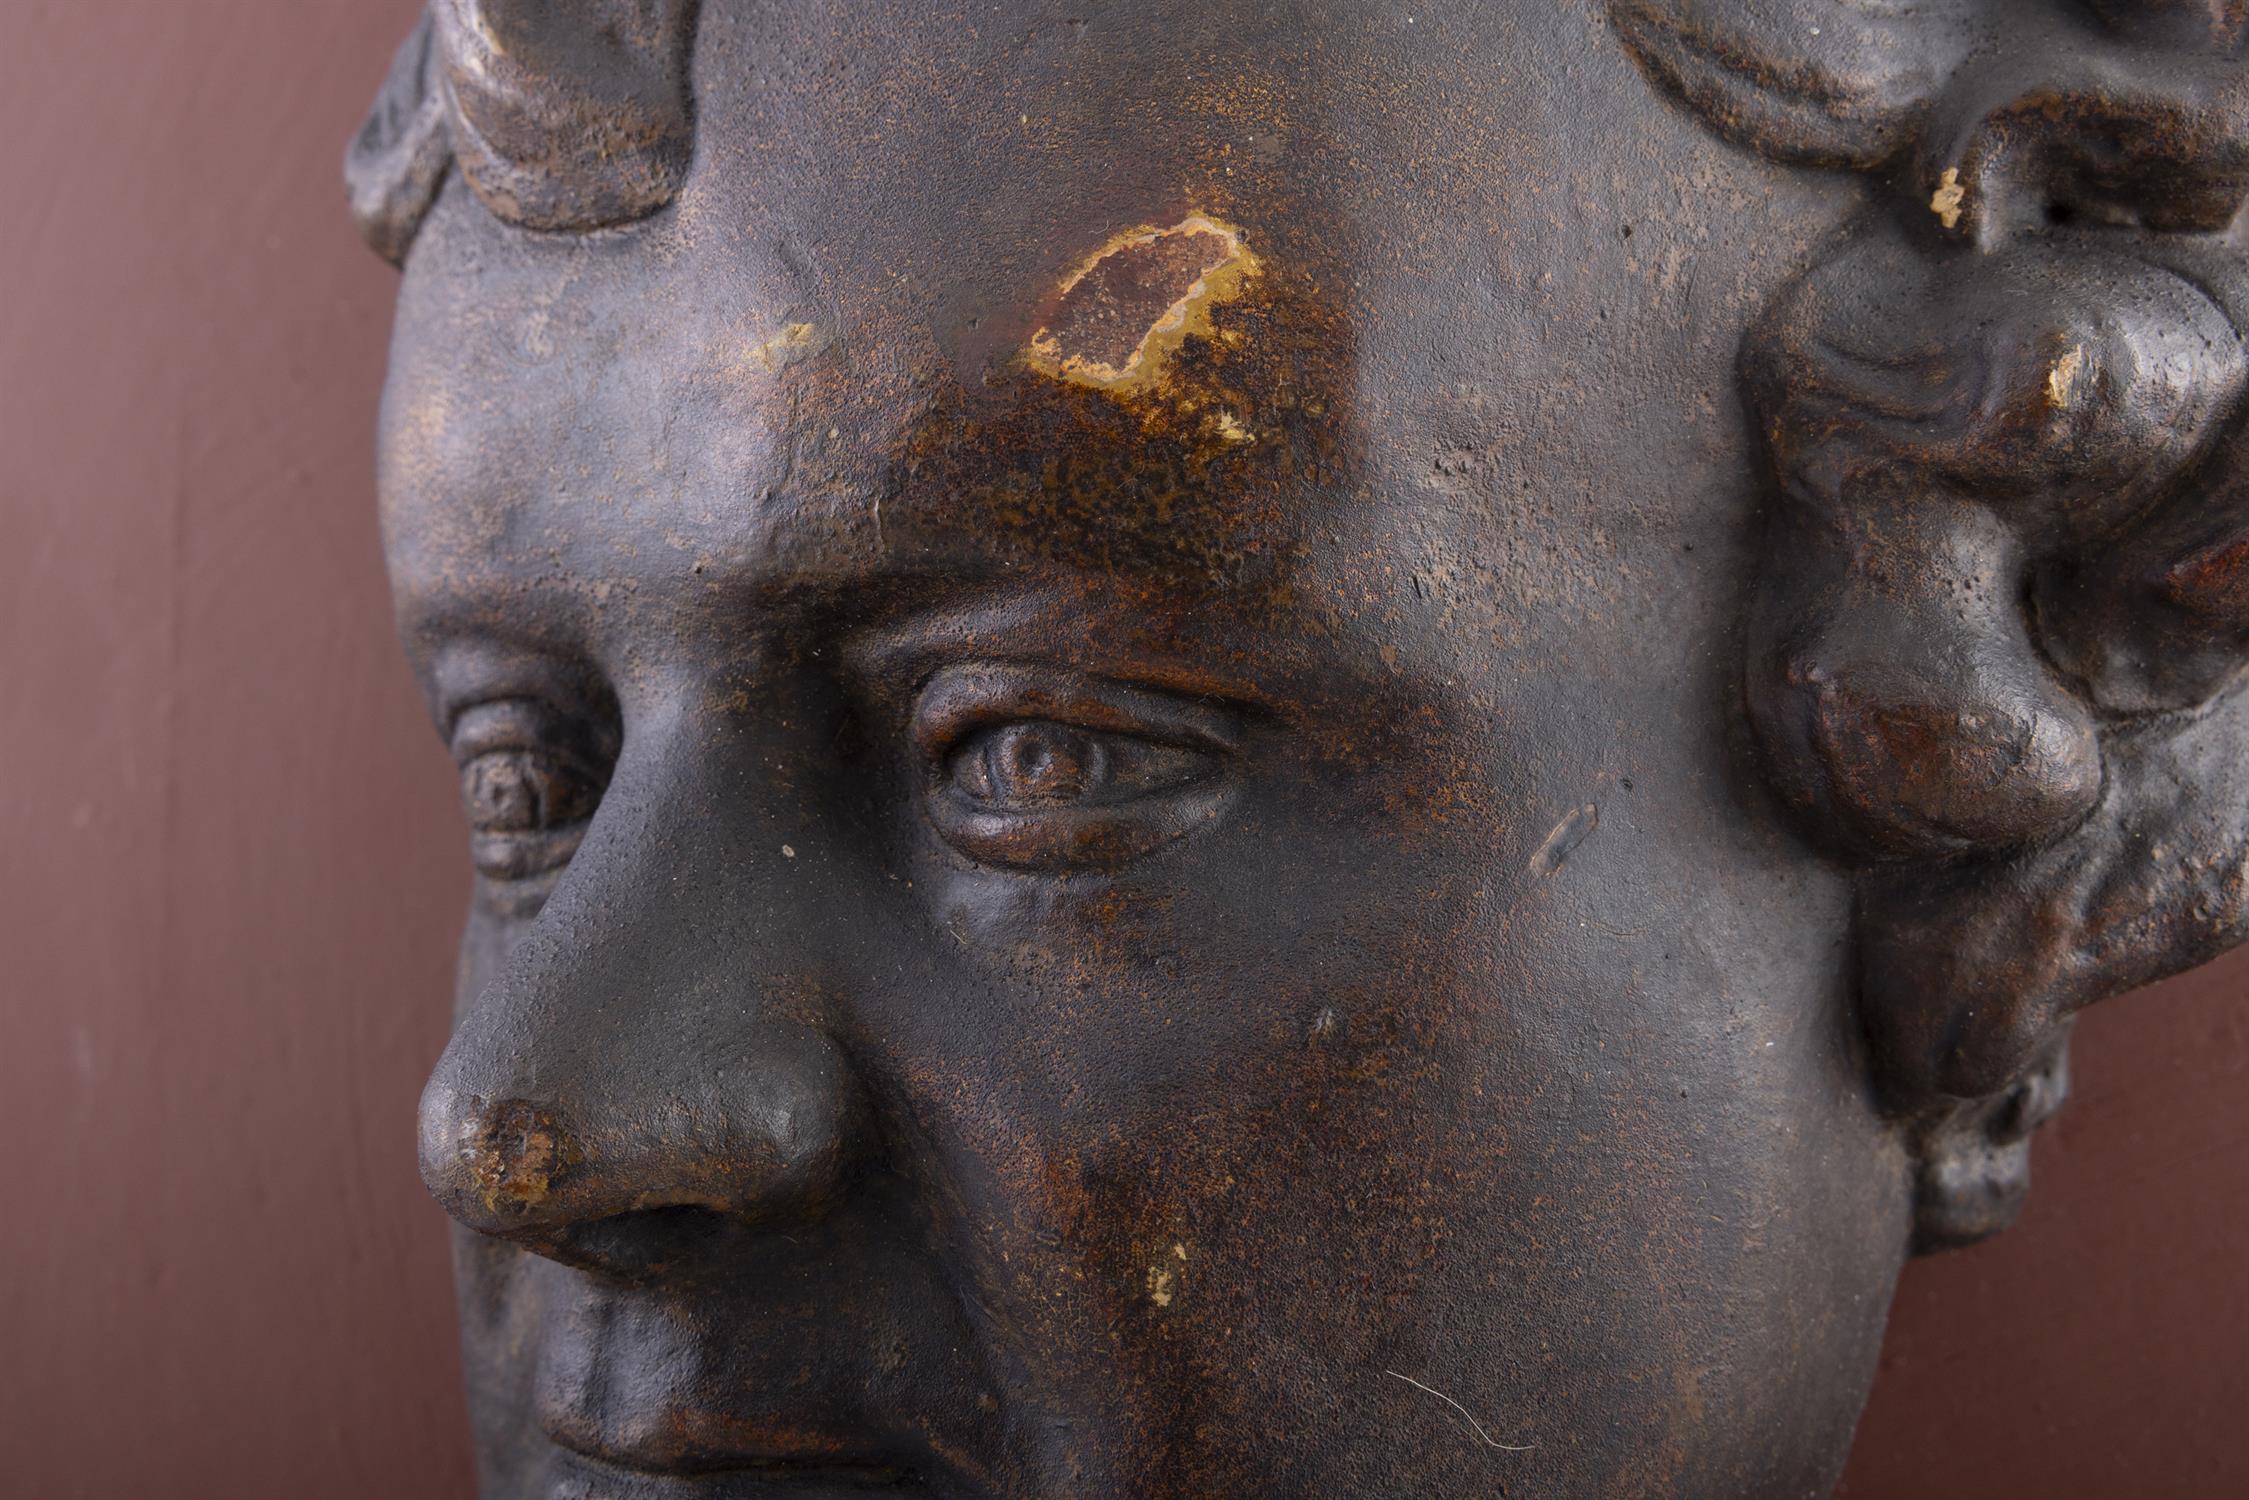 ***Please note: this is ceramic with a 'bronzed' finish rather than bronze*** A BRONZED DEATH MASK - Image 3 of 12